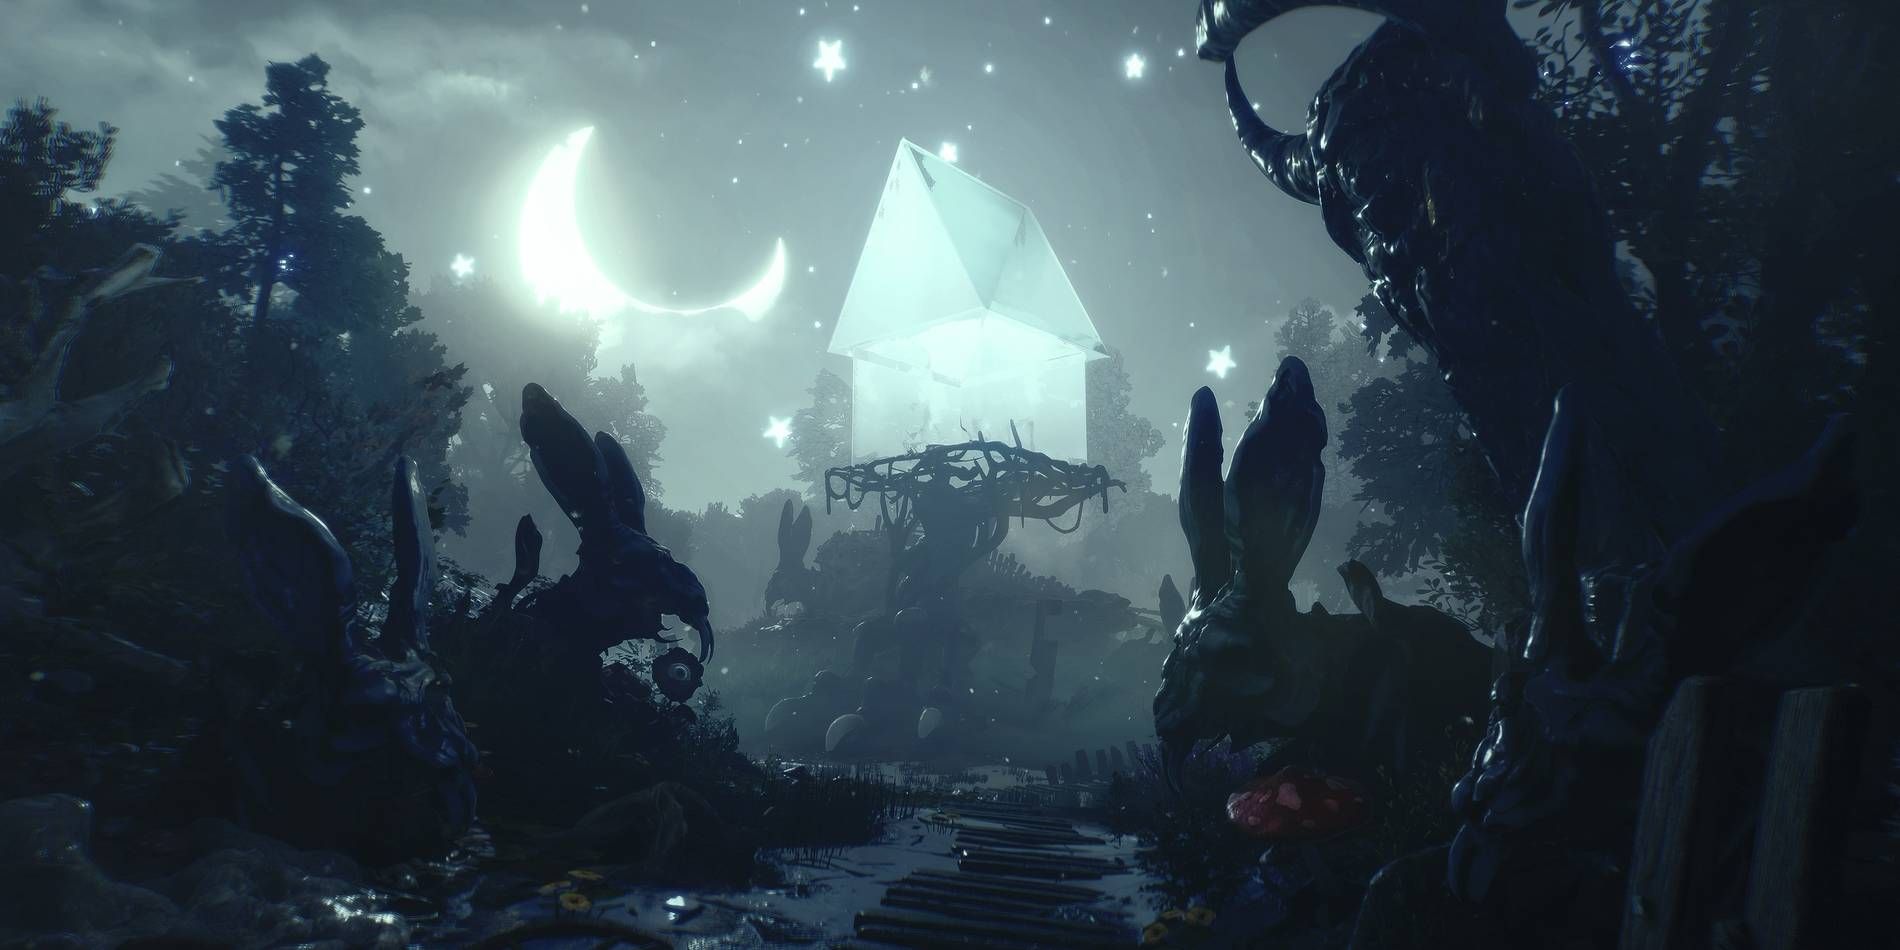 Blacktail Yaga Hut in Forest with Multiple Creatures at Night Illuminated by Crescent Moon